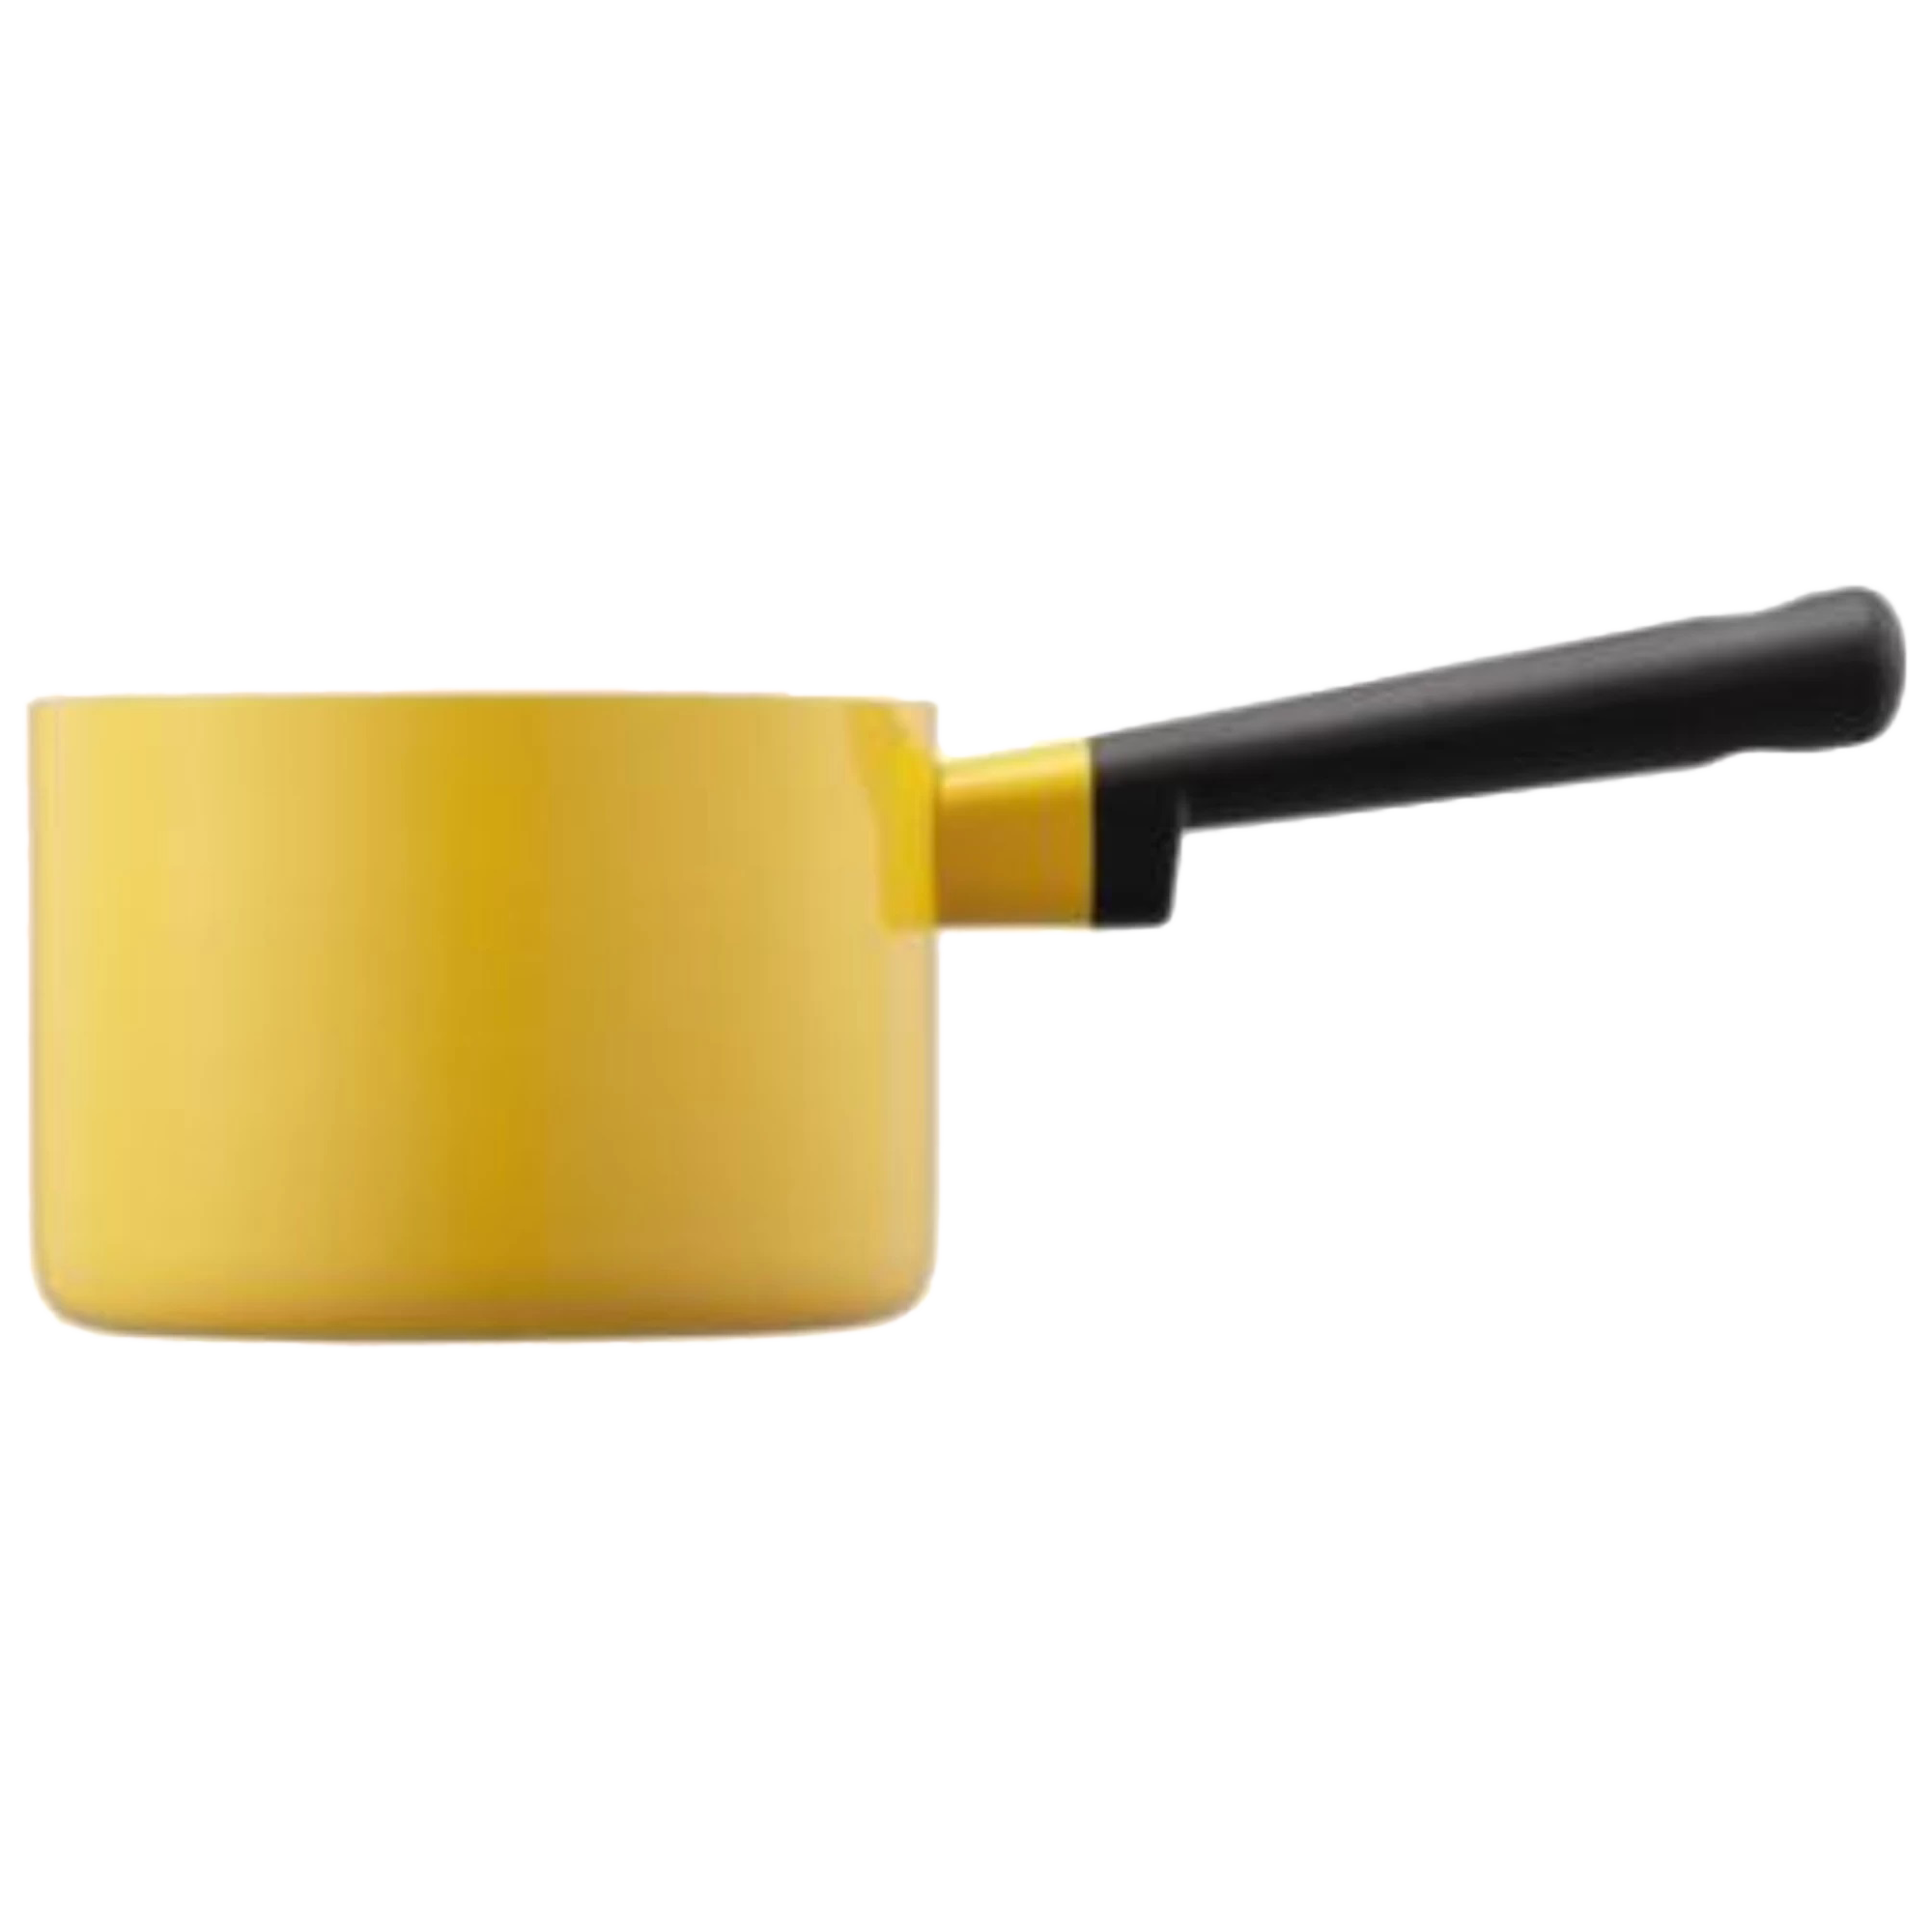 Lock & Lock Pan For Stoves Cooktops and Induction (Non-Stick Titanium Coating, LDE1142, Yellow)_1